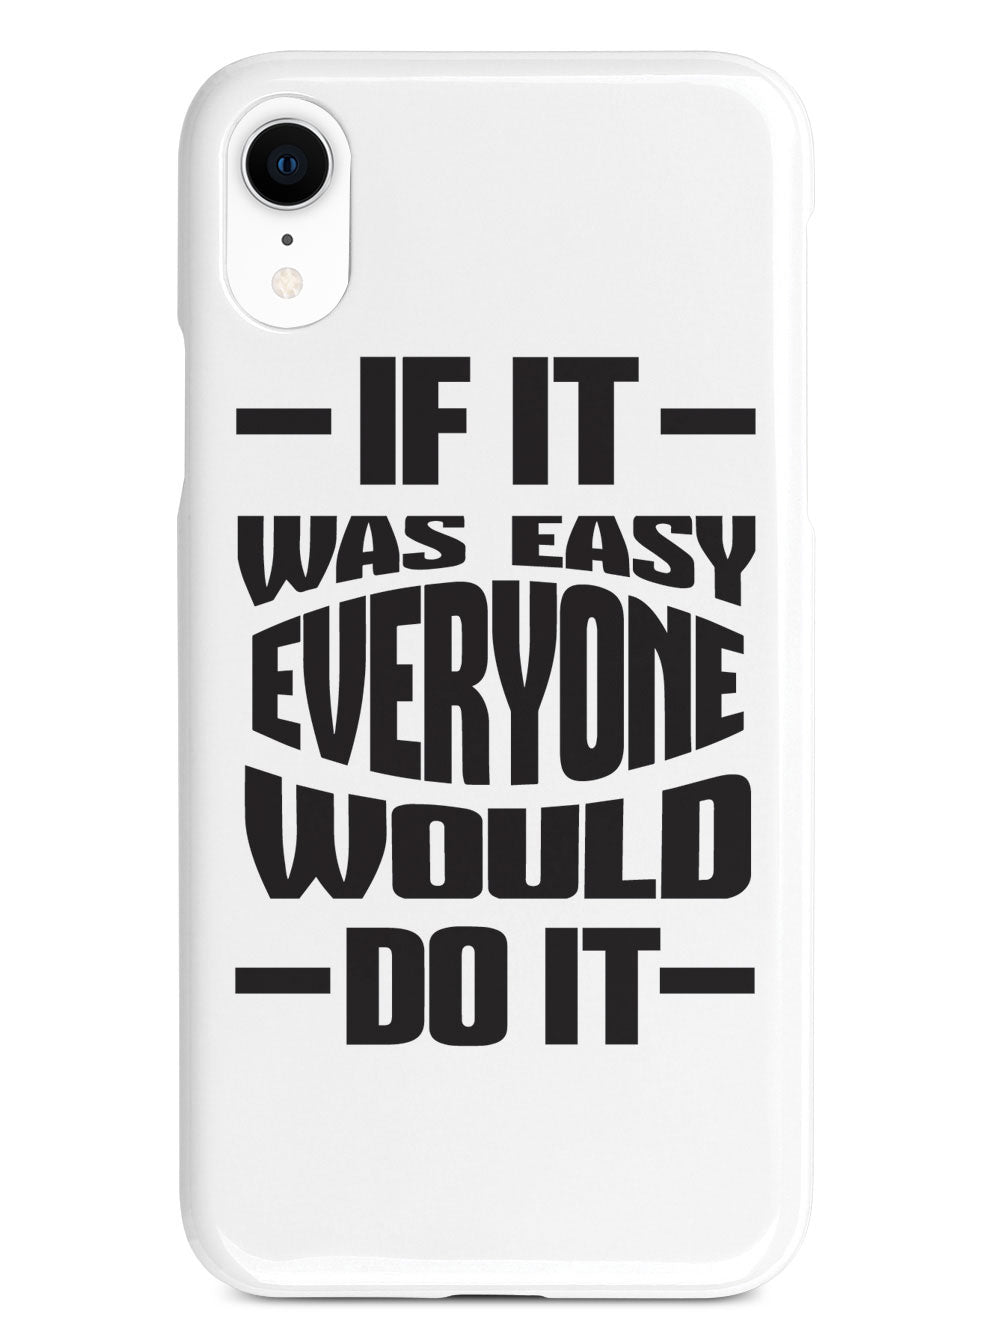 If It Was Easy, Everyone Would Do It - White Case